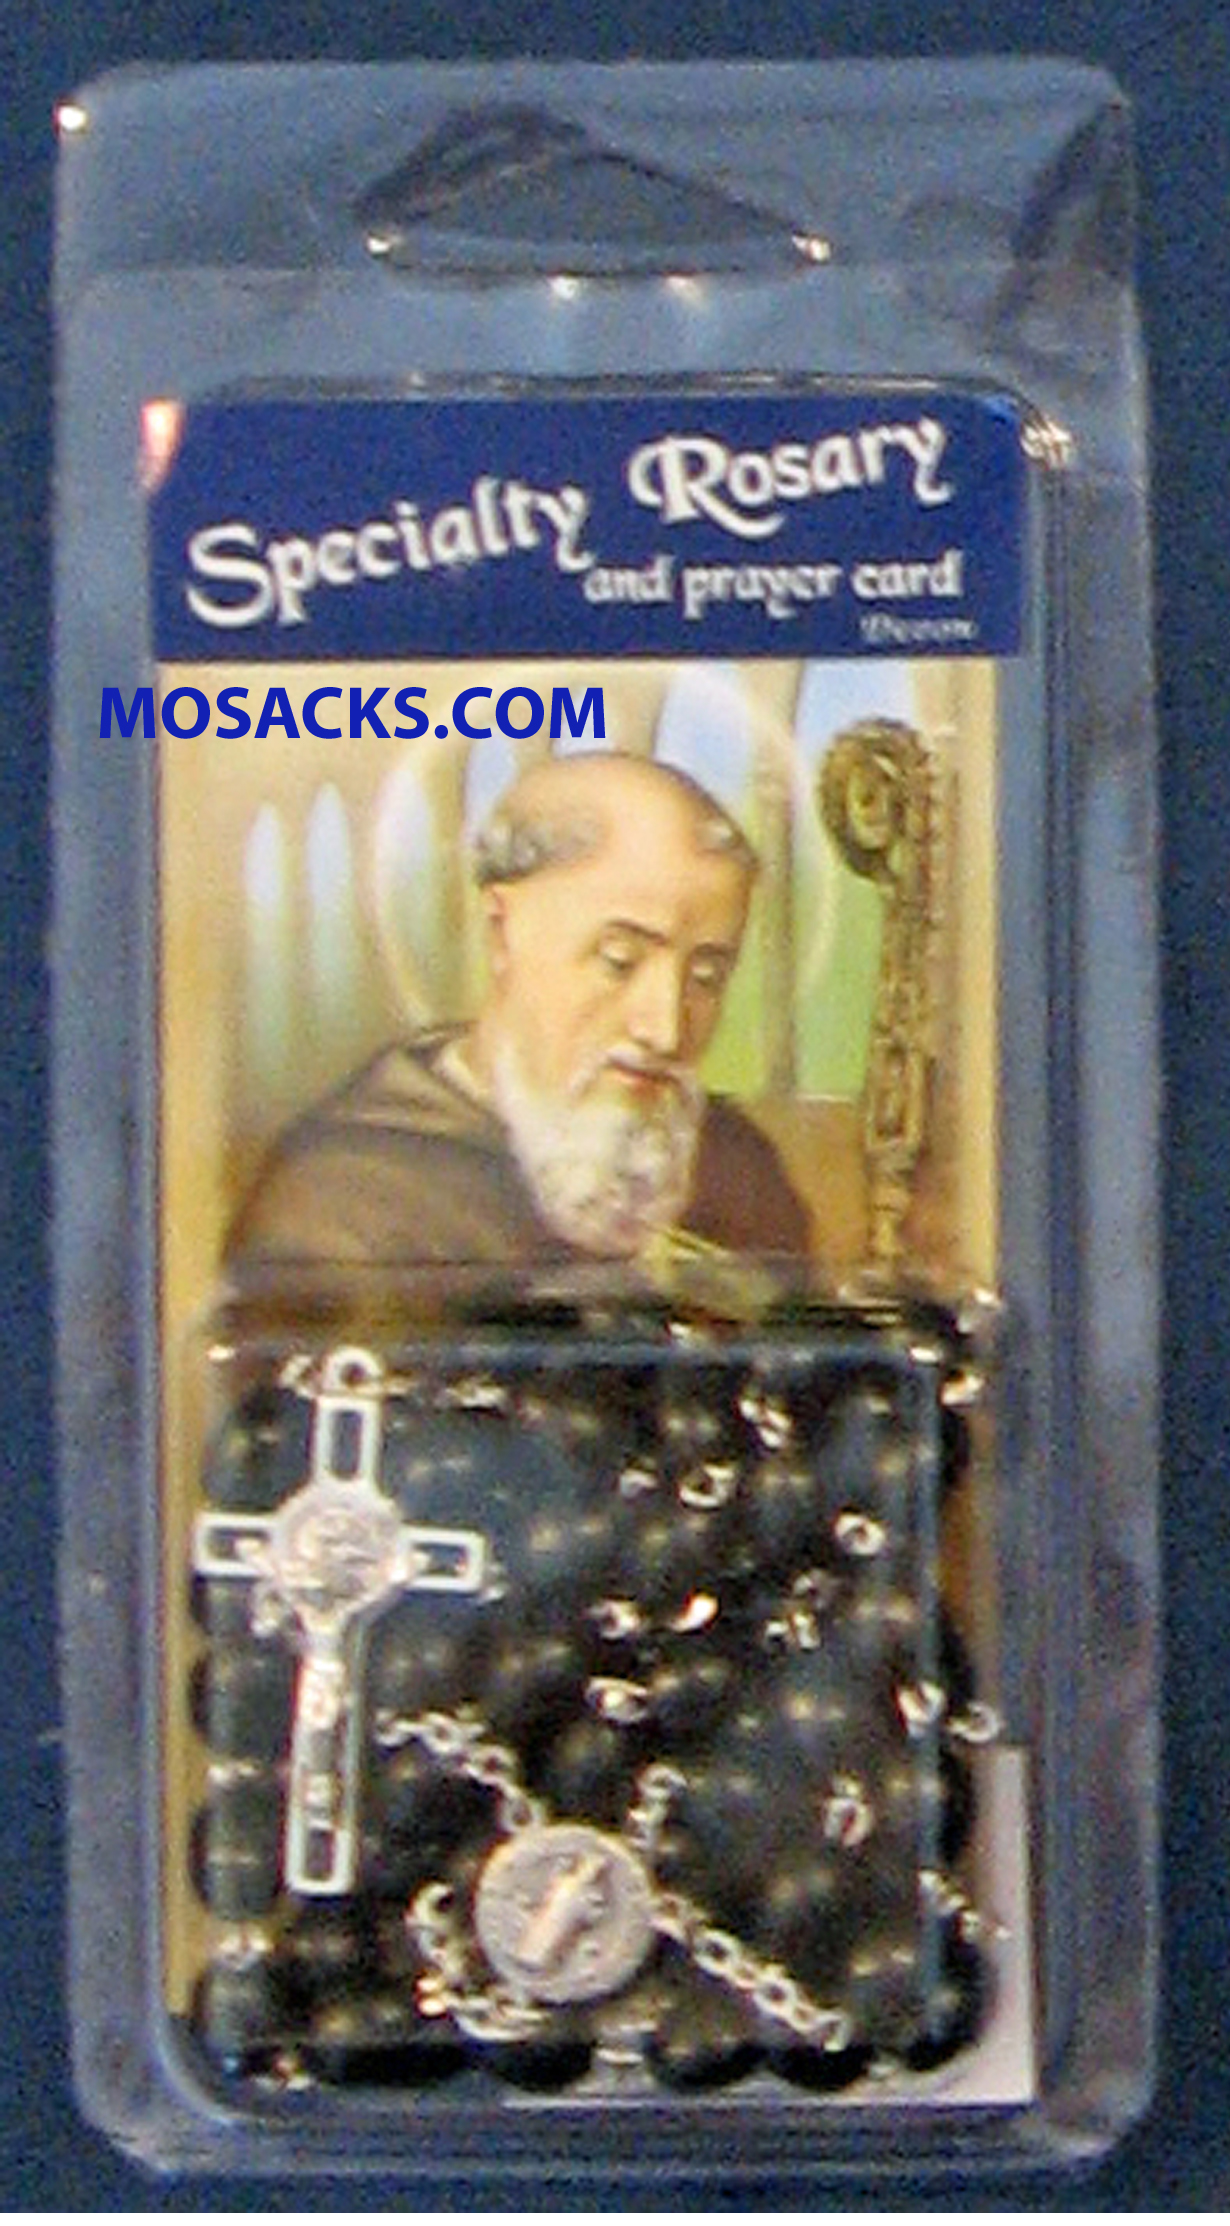 Specialty Rosary St. Benedict Rosary and St. Benedict Prayer Card 64-625/BEN/C1 is a 17” Black Oval Bead St. Benedict Rosary with St. Benedict Crucifix and St. Benedict Medal Joiner